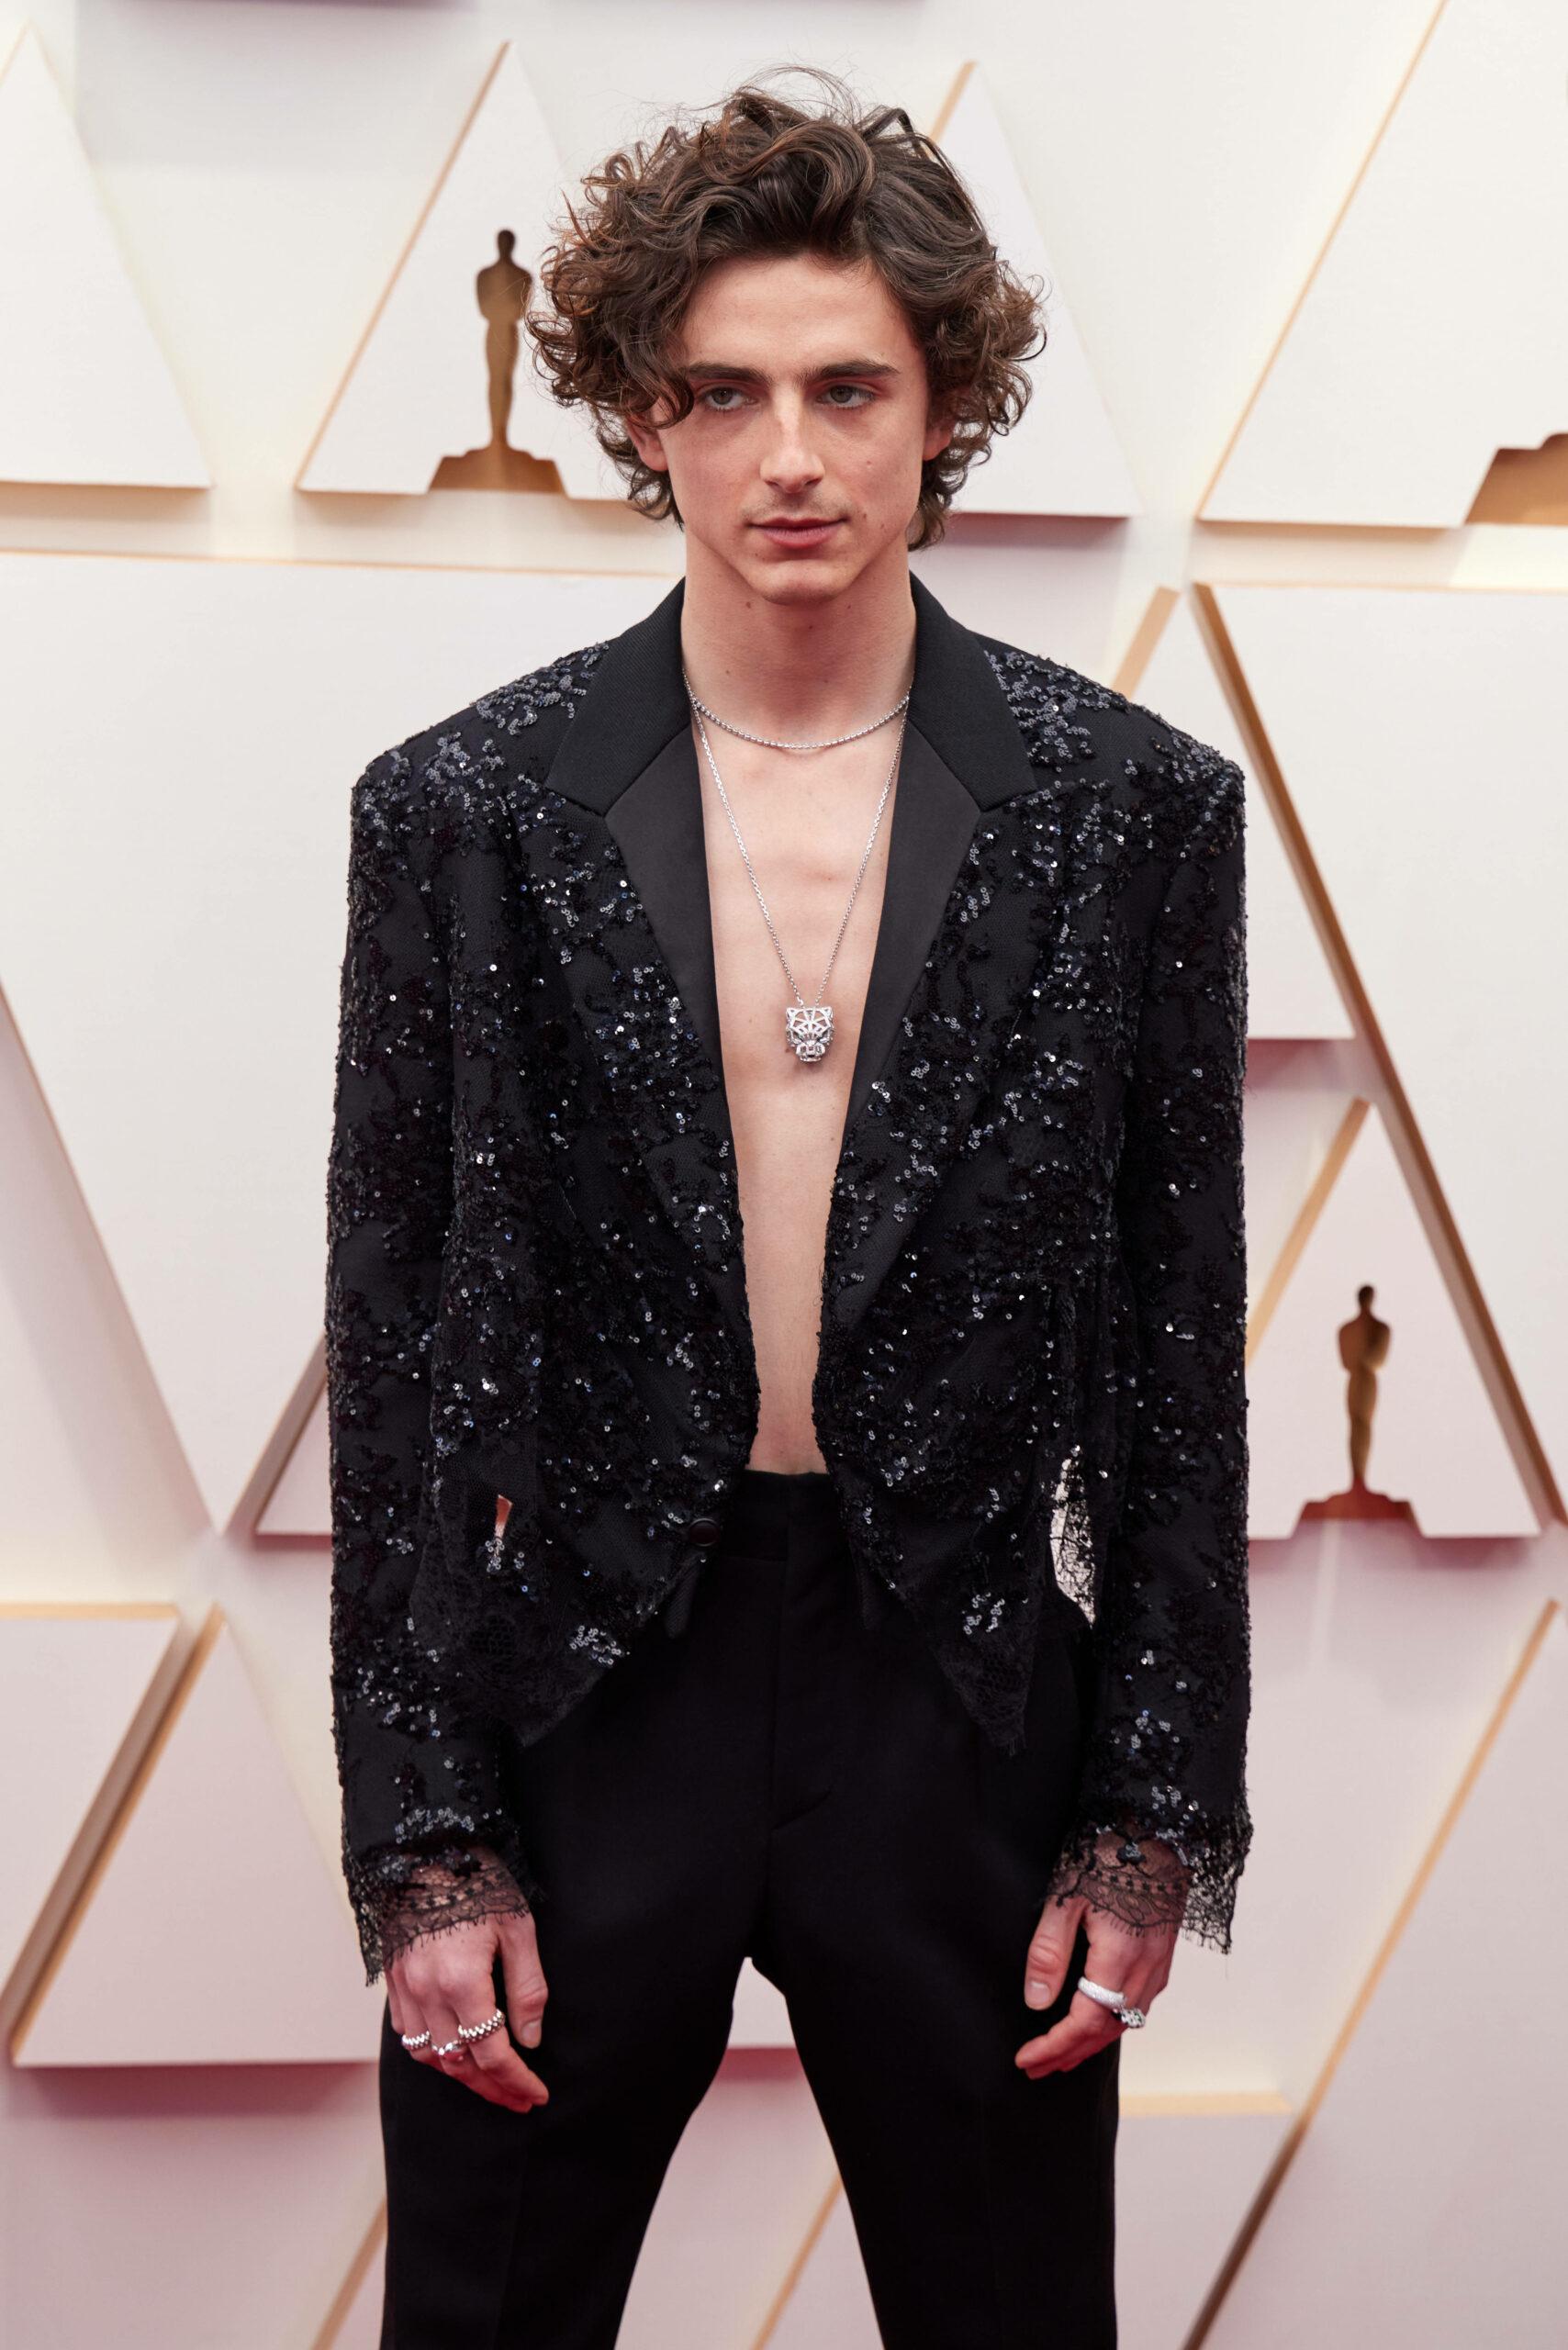 Timothee Chalamet arrives on the red carpet of the 94th Oscars.